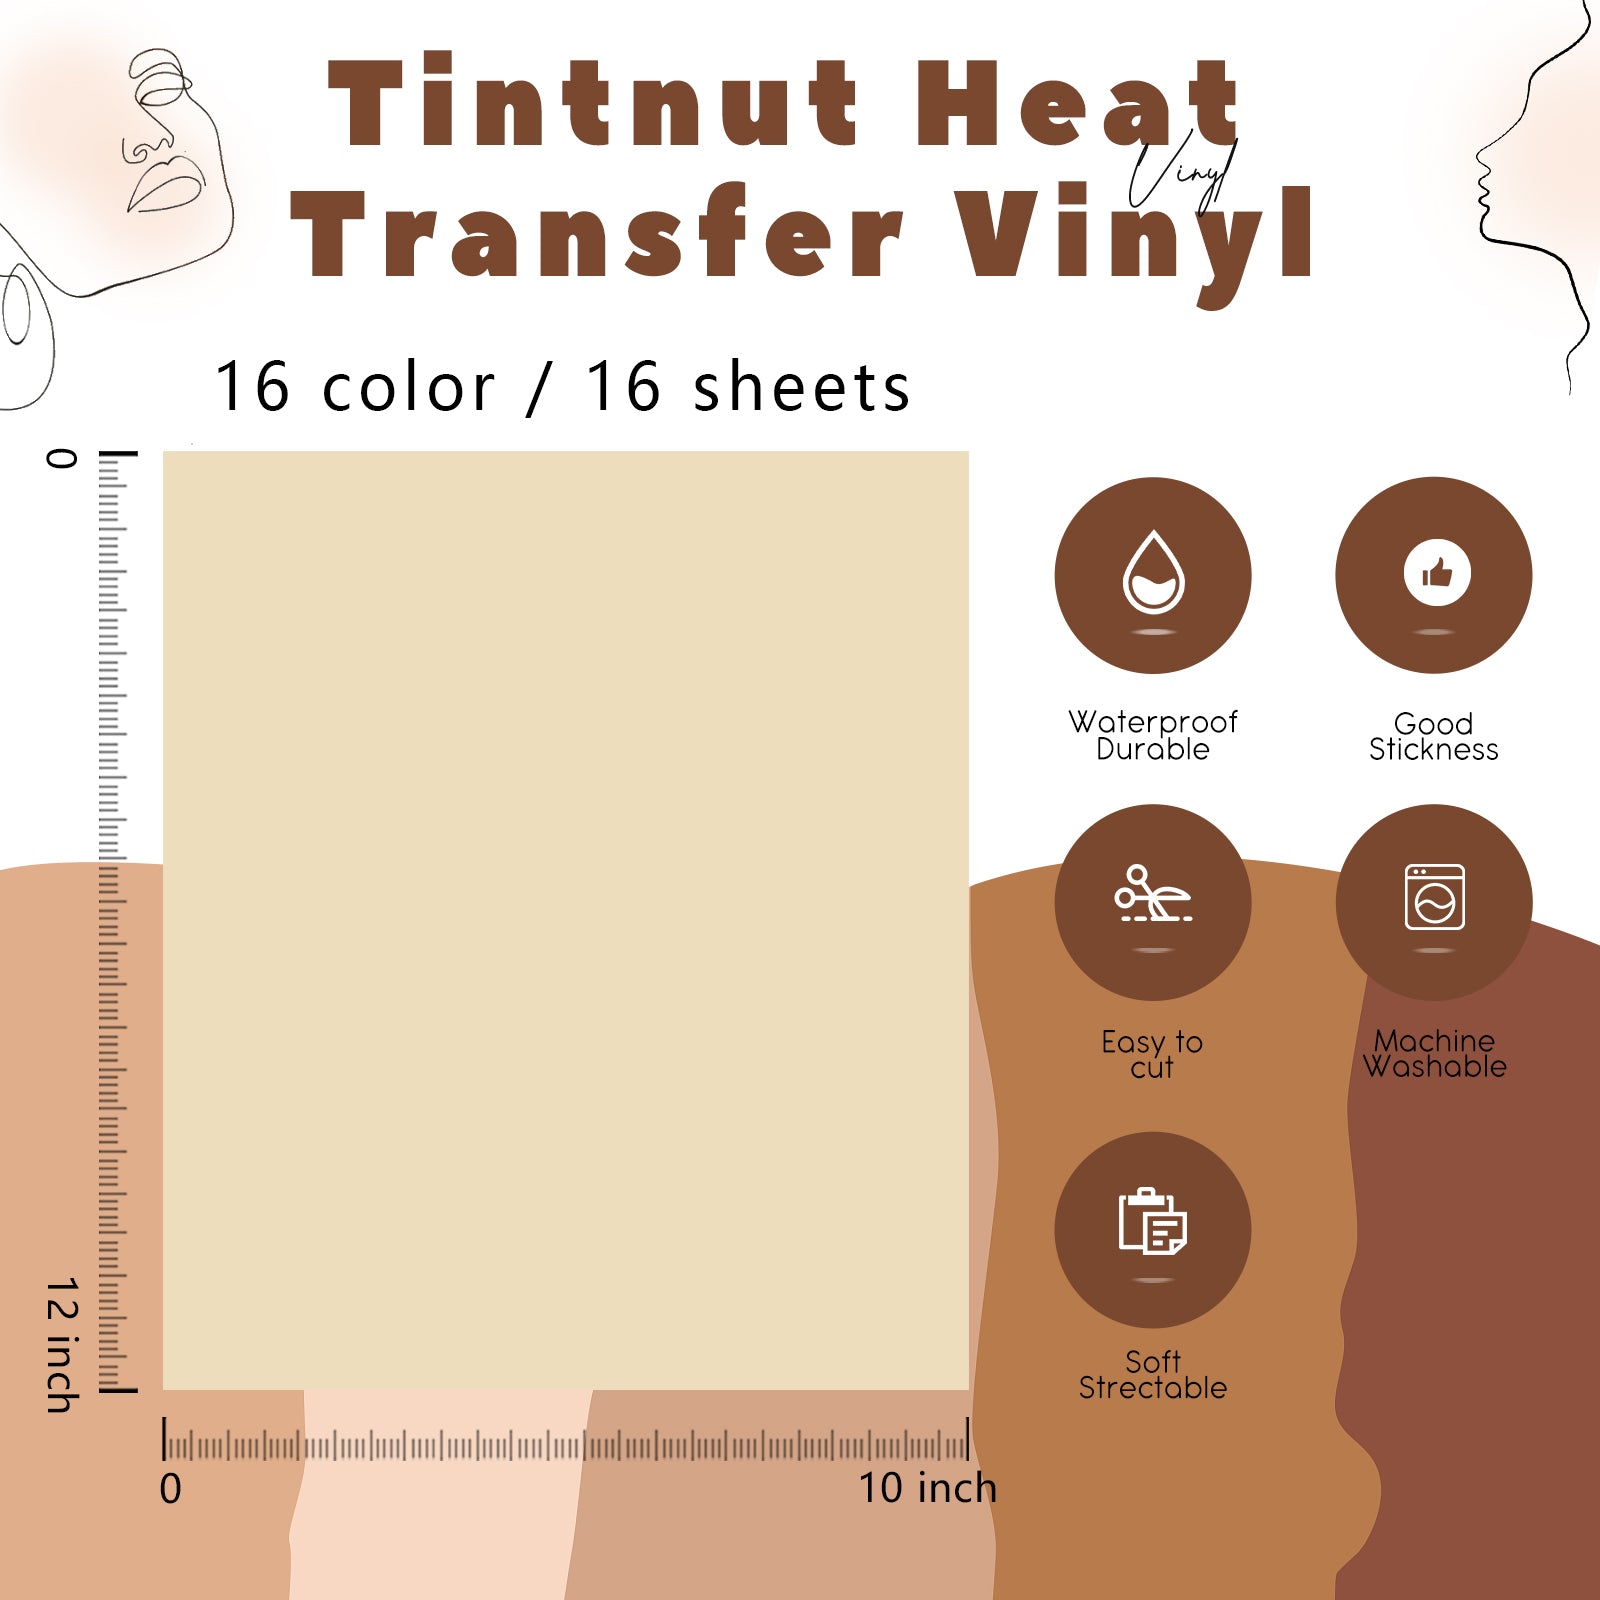 Tintnut Heat Transfer Vinyl - 4 Sheets 12x10inch UV Color Changing Iron on  Vinyl Solid Sun Sunlight Sensitive HTV for T-Shirts Compatible with Cricut